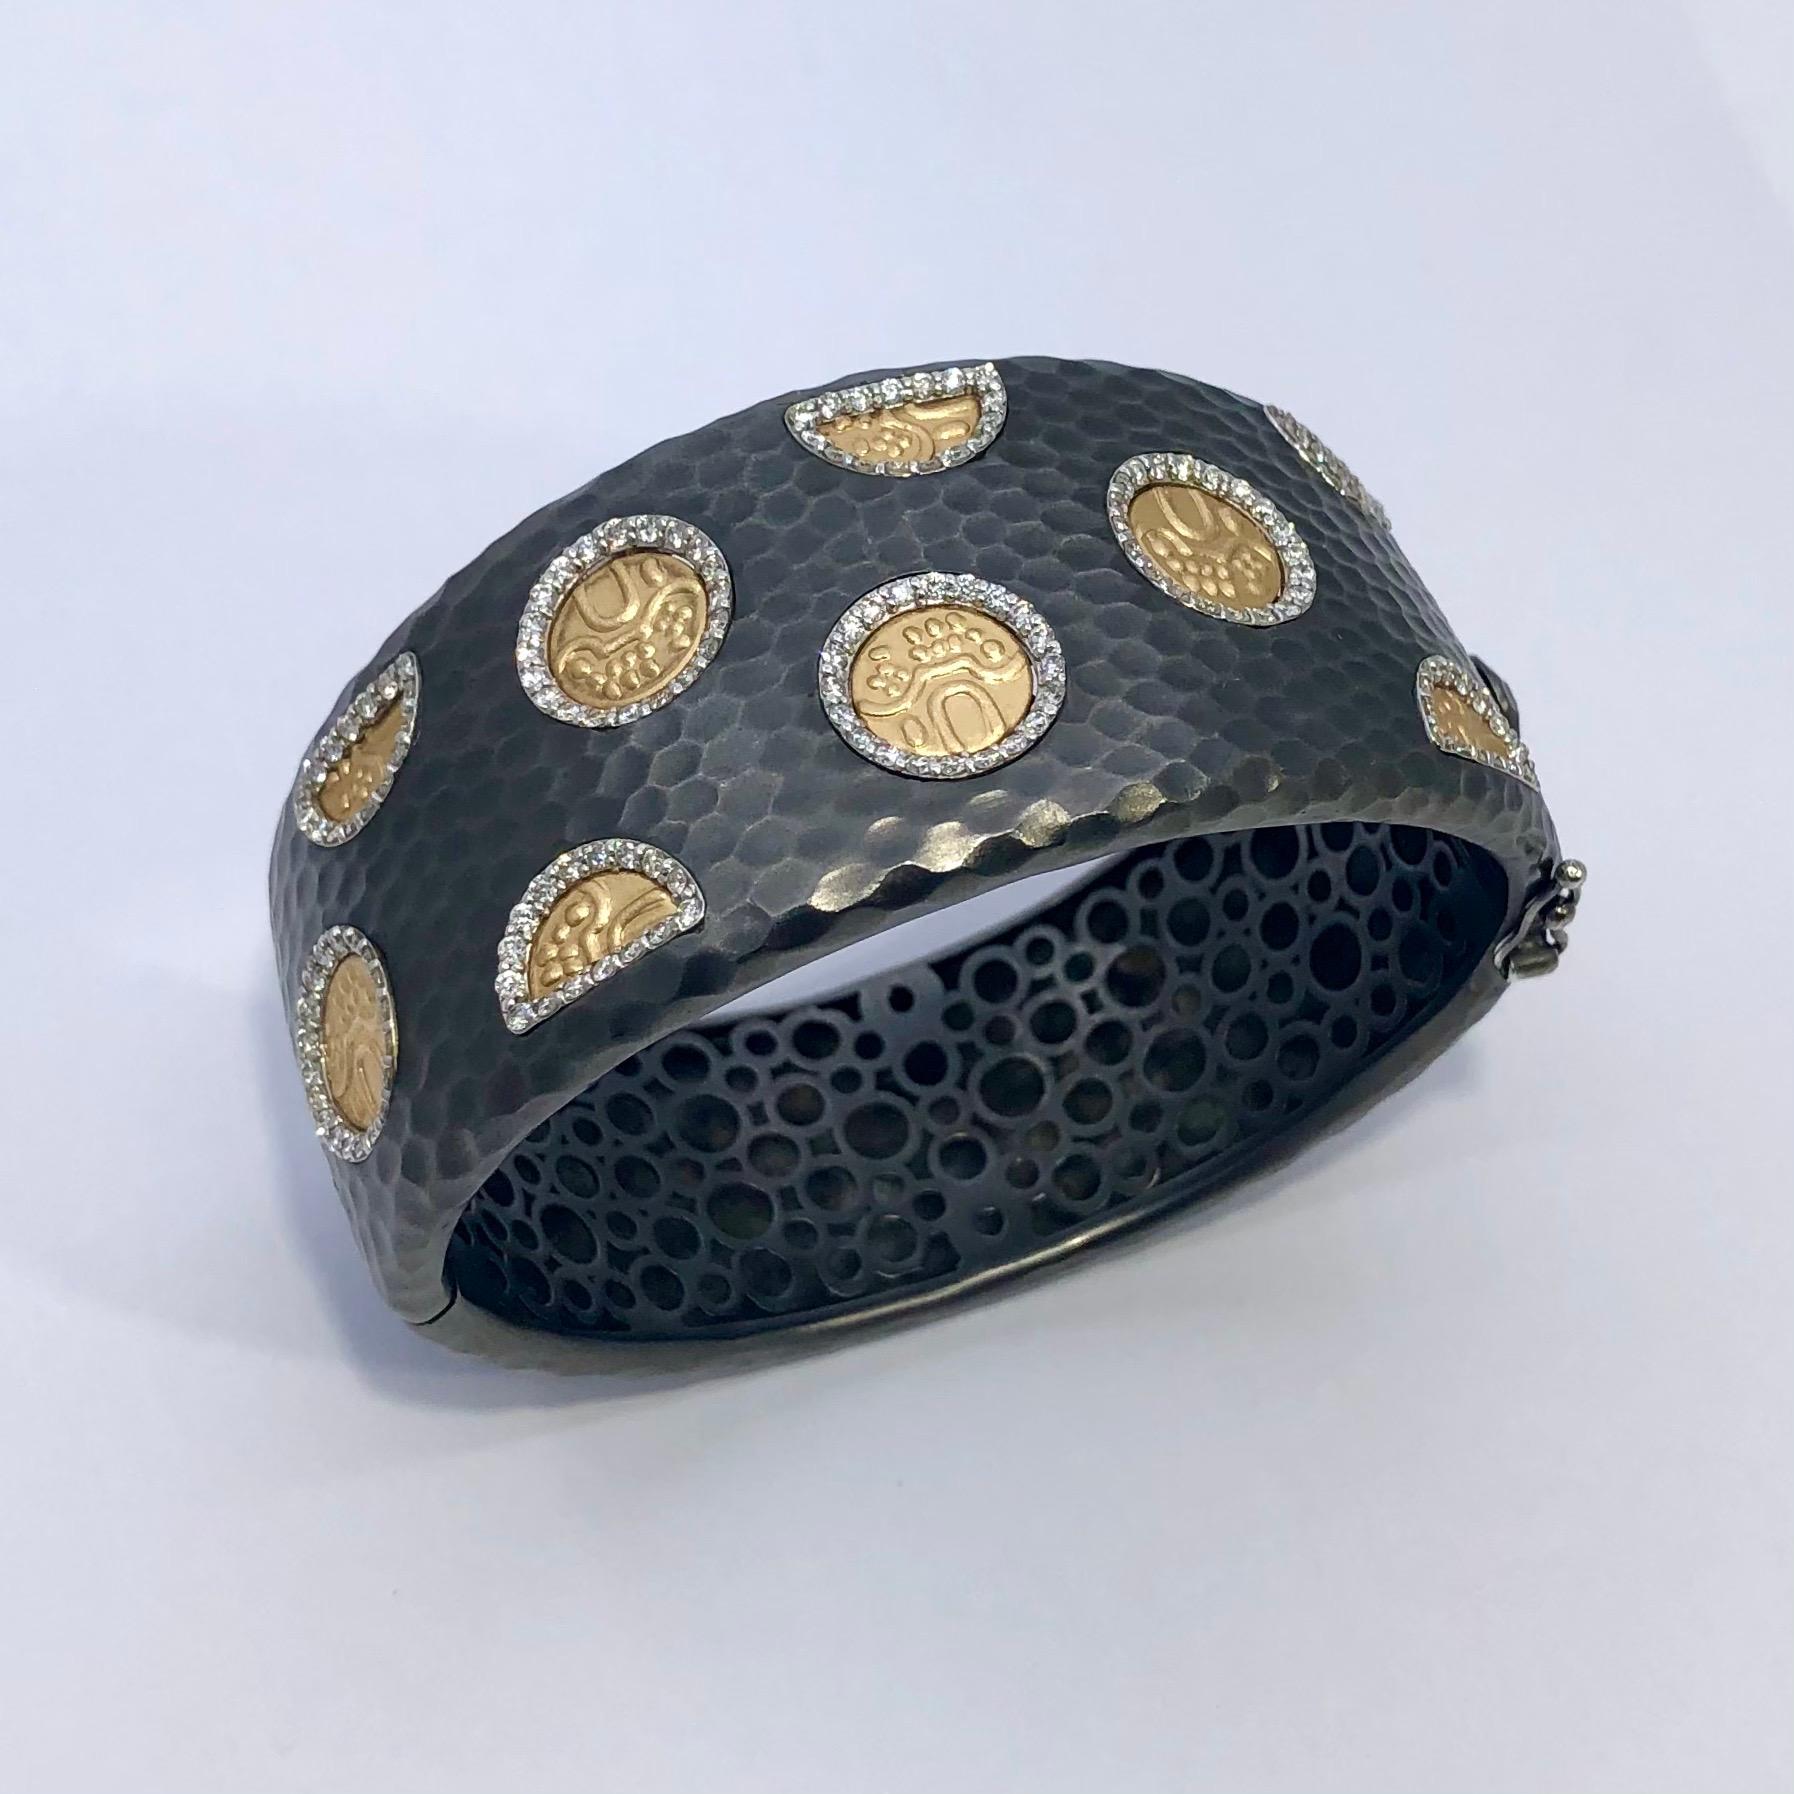 Roberto Coin Hammered Cuff Bracelet with Gold Motifs and Diamonds 3